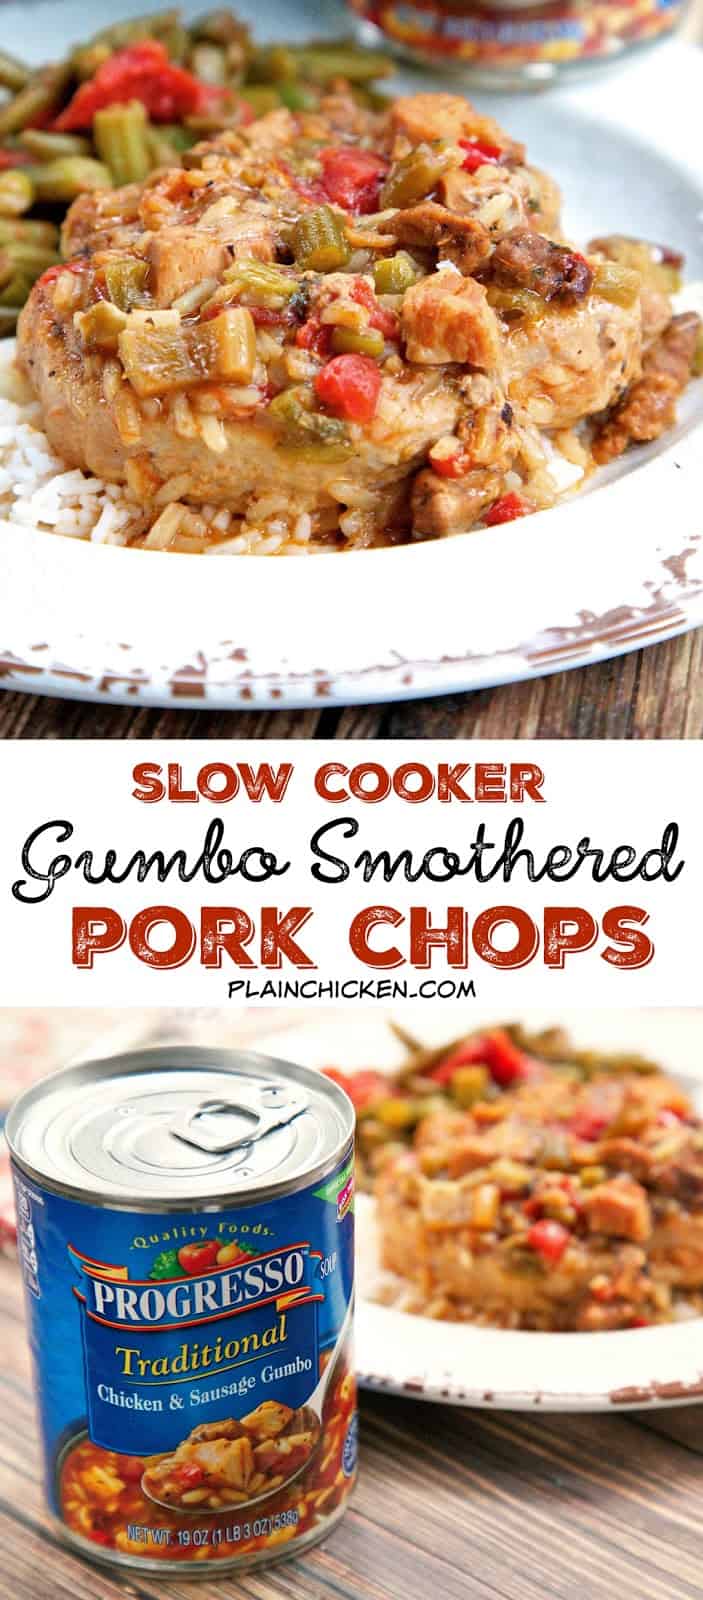 Slow Cooker Gumbo Smothered Pork Chops - pork chops seasoned with cajun seasoning and slow cooked in Progresso™ Chicken and Sausage Gumbo. SO easy and super delicious!  This was a huge hit in our house!